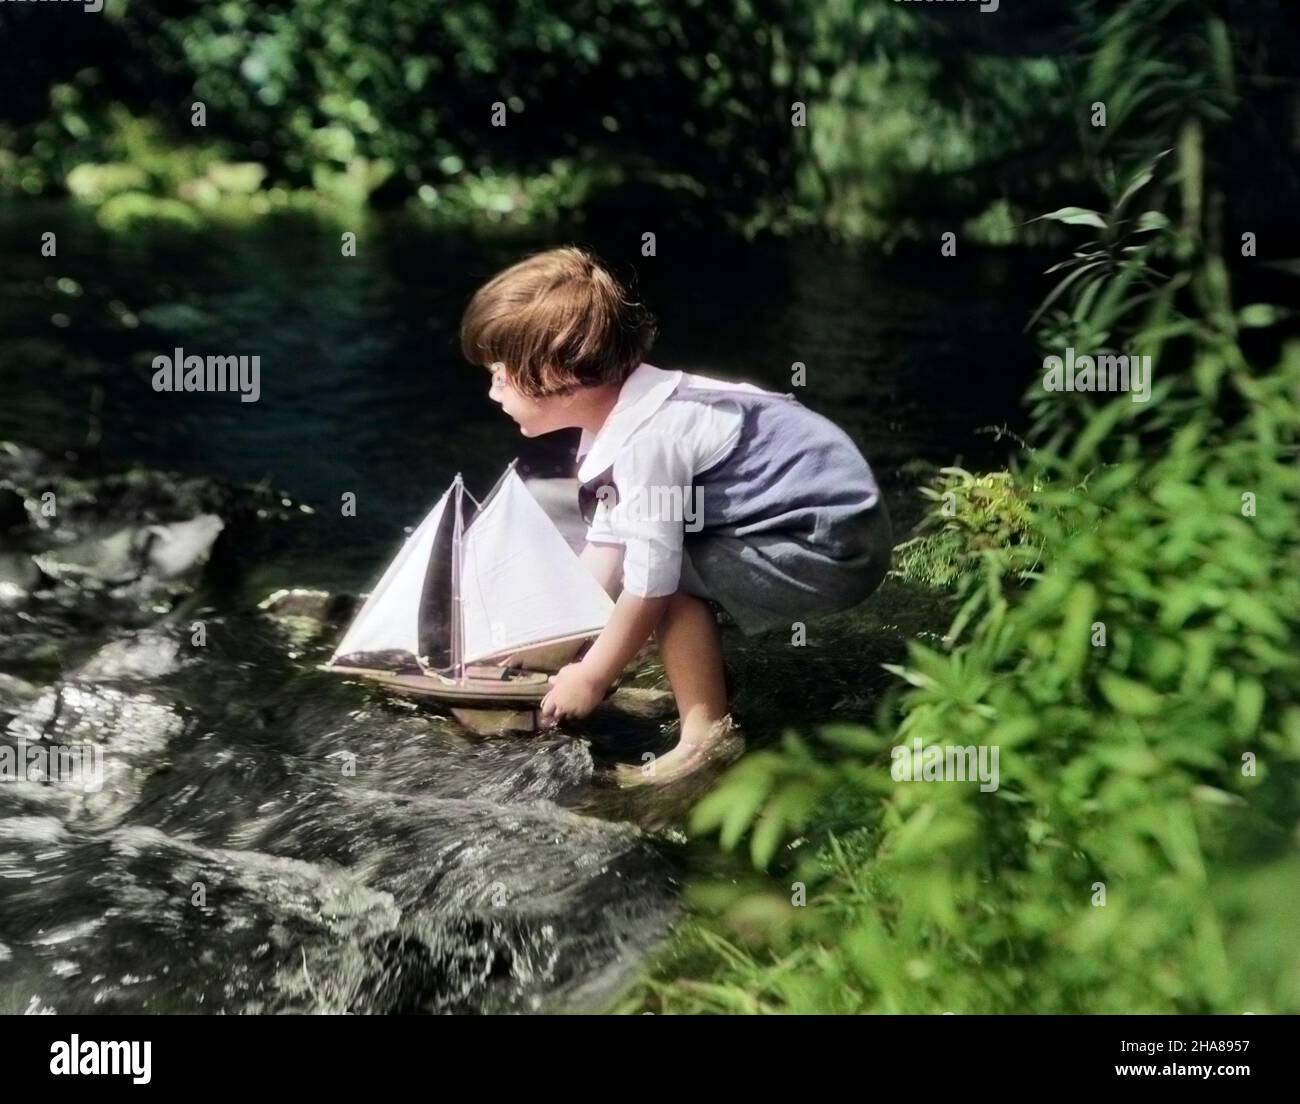 1920s LITTLE BOY PUTTING TOY SAILBOAT INTO STREAM - j128c HAR001 HARS TRANSPORTATION SUMMERTIME DREAMS HAPPINESS ADVENTURE RECREATION IMAGINATION MOBILITY PLEASANT AGREEABLE CHARMING JUVENILES LOVABLE PLEASING SEASON ADORABLE APPEALING CAUCASIAN ETHNICITY HAR001 OLD FASHIONED Stock Photo